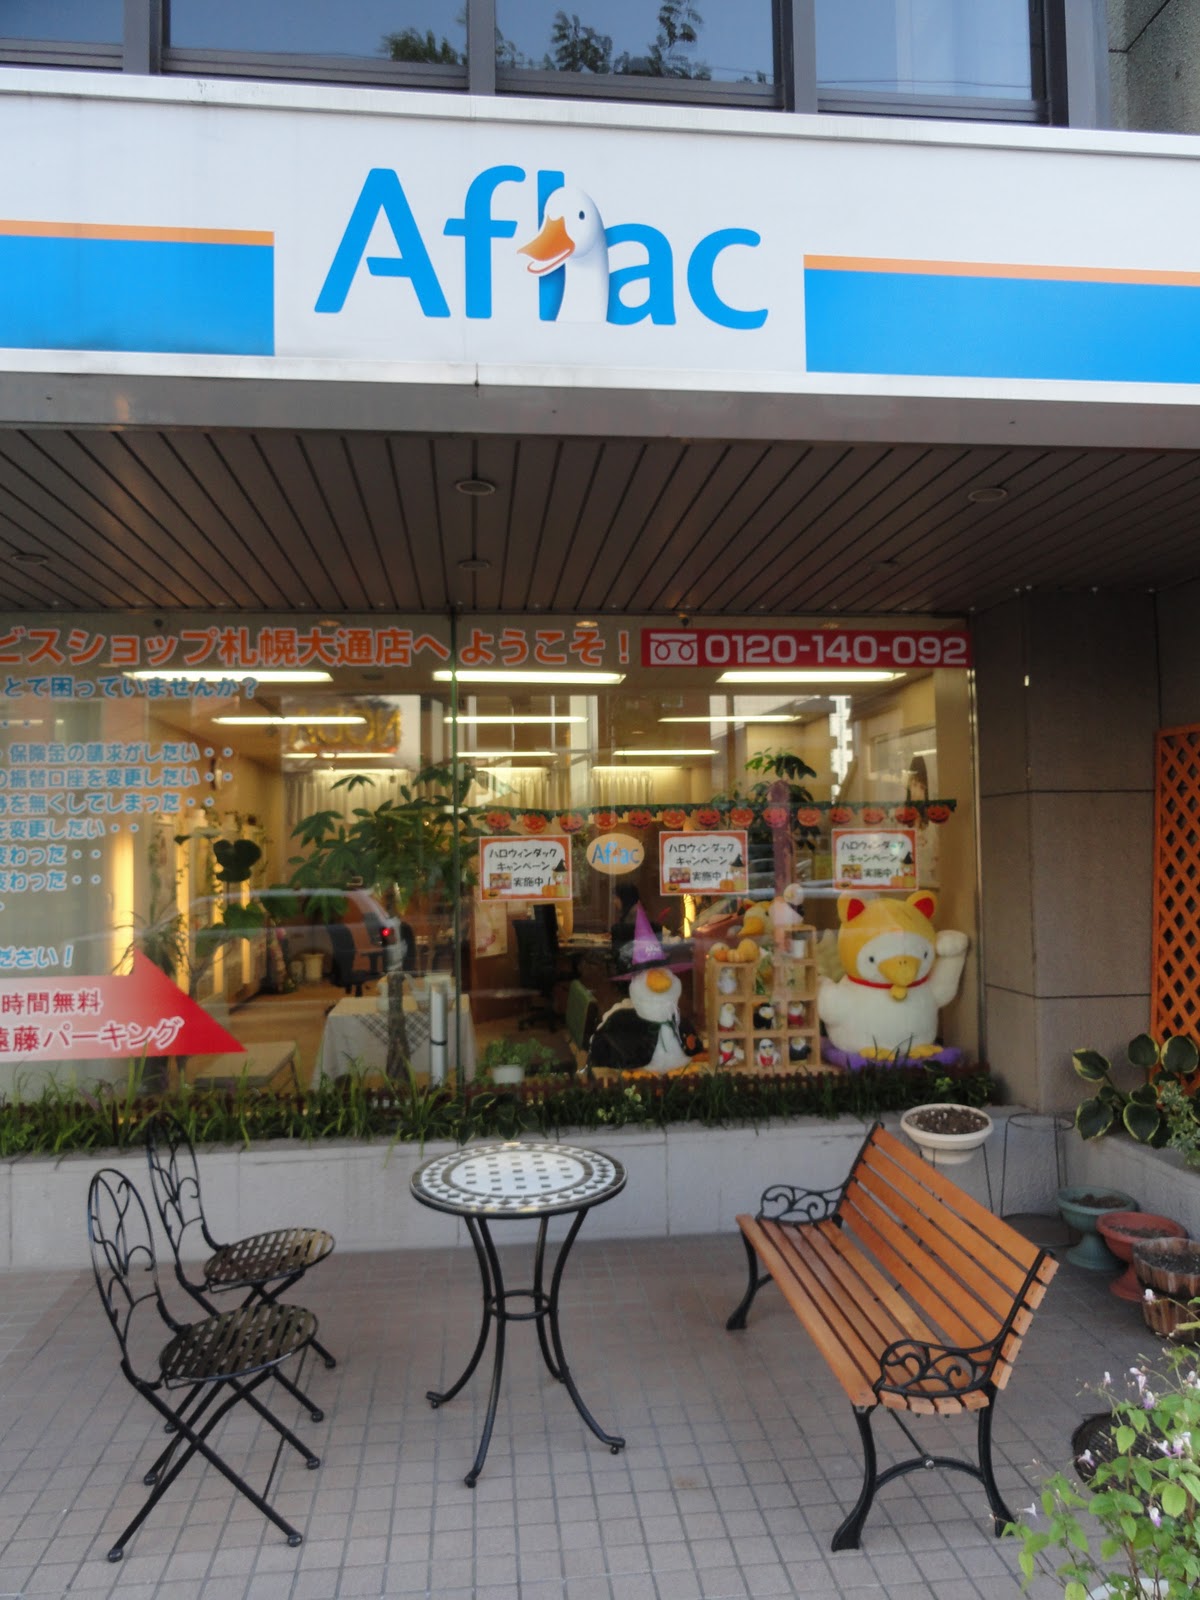 Image result for aflac duck cafe"